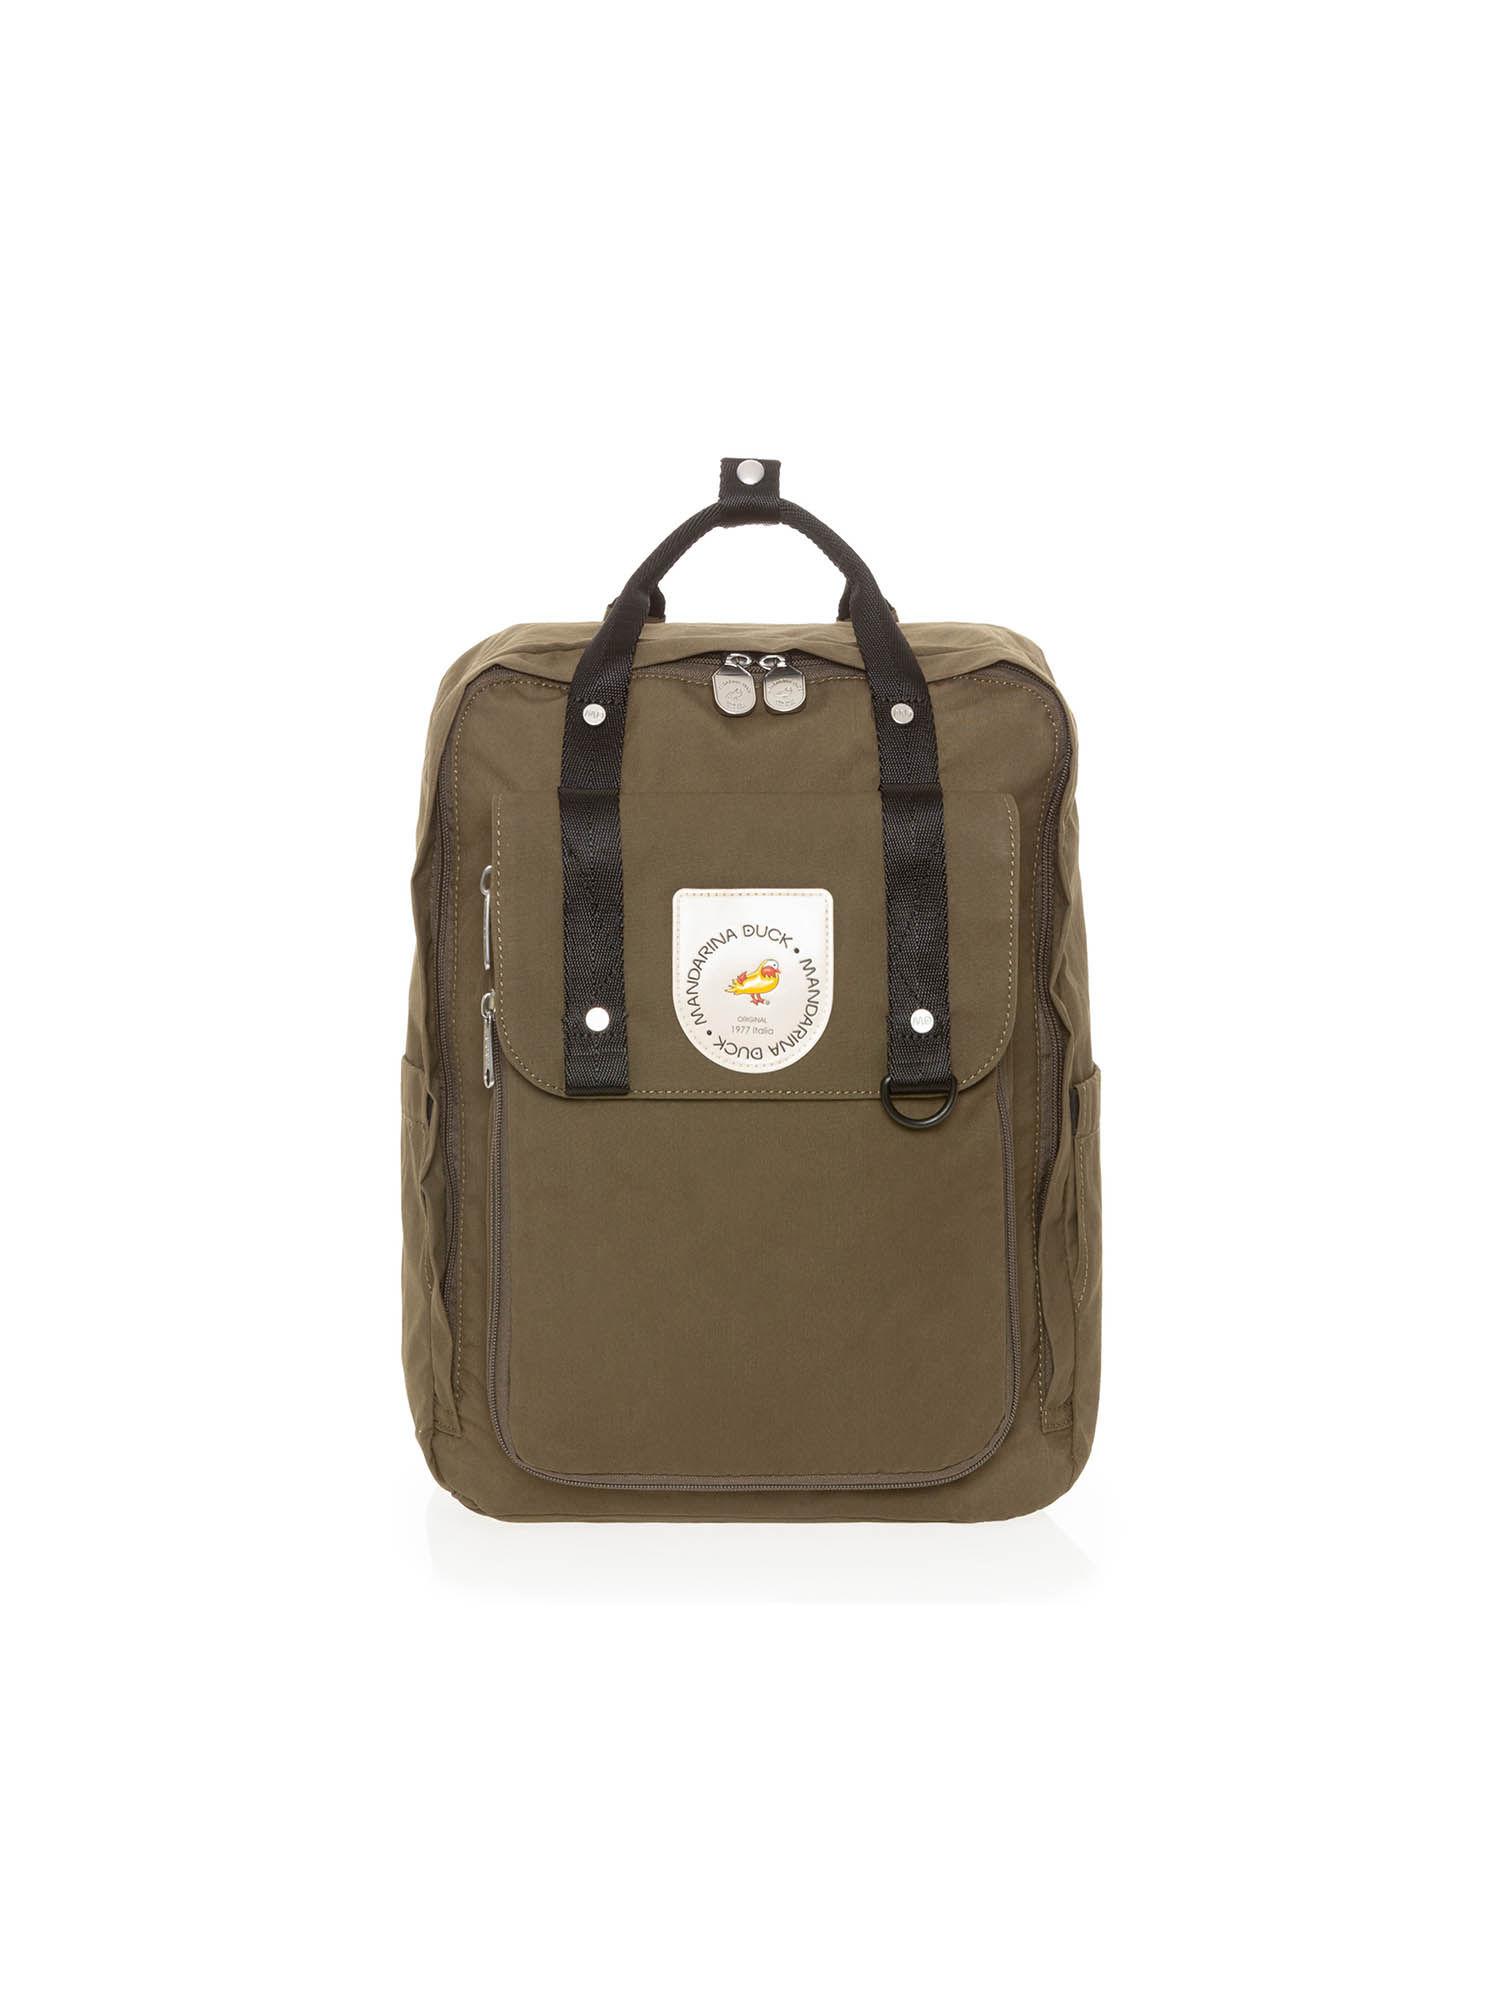 military anniversary large backpacks for travel